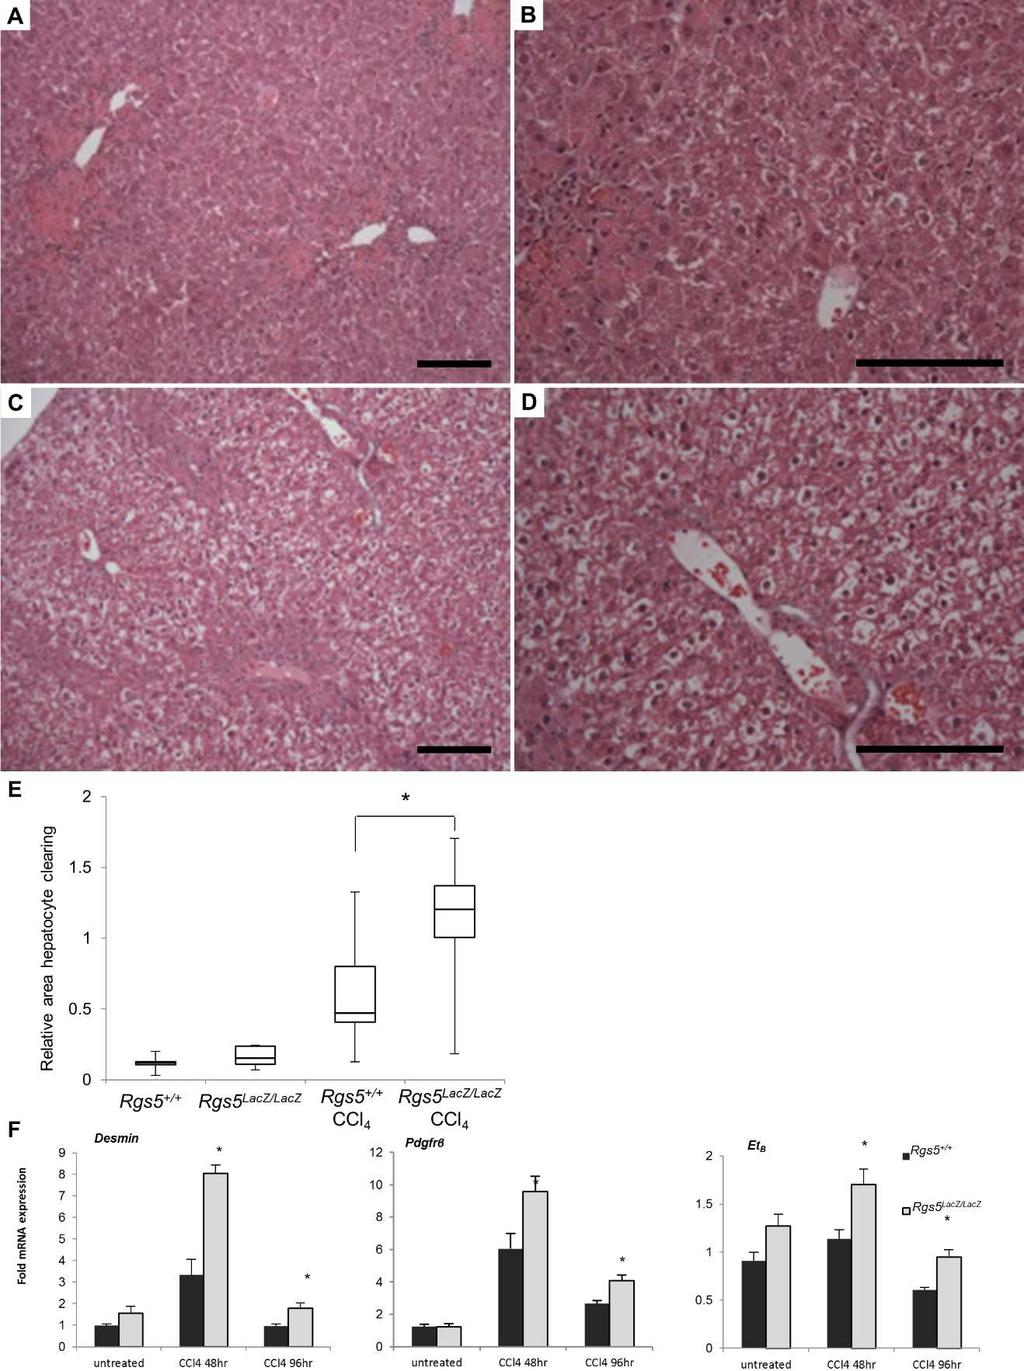 Figure 2.7 Rgs5 LacZ/LacZ mice have increased liver injury and HSC activation following acute injury Livers from Rgs5 +/+ and Rgs5 LacZ/LacZ were collected at 96hr following a single CCl 4 injection.